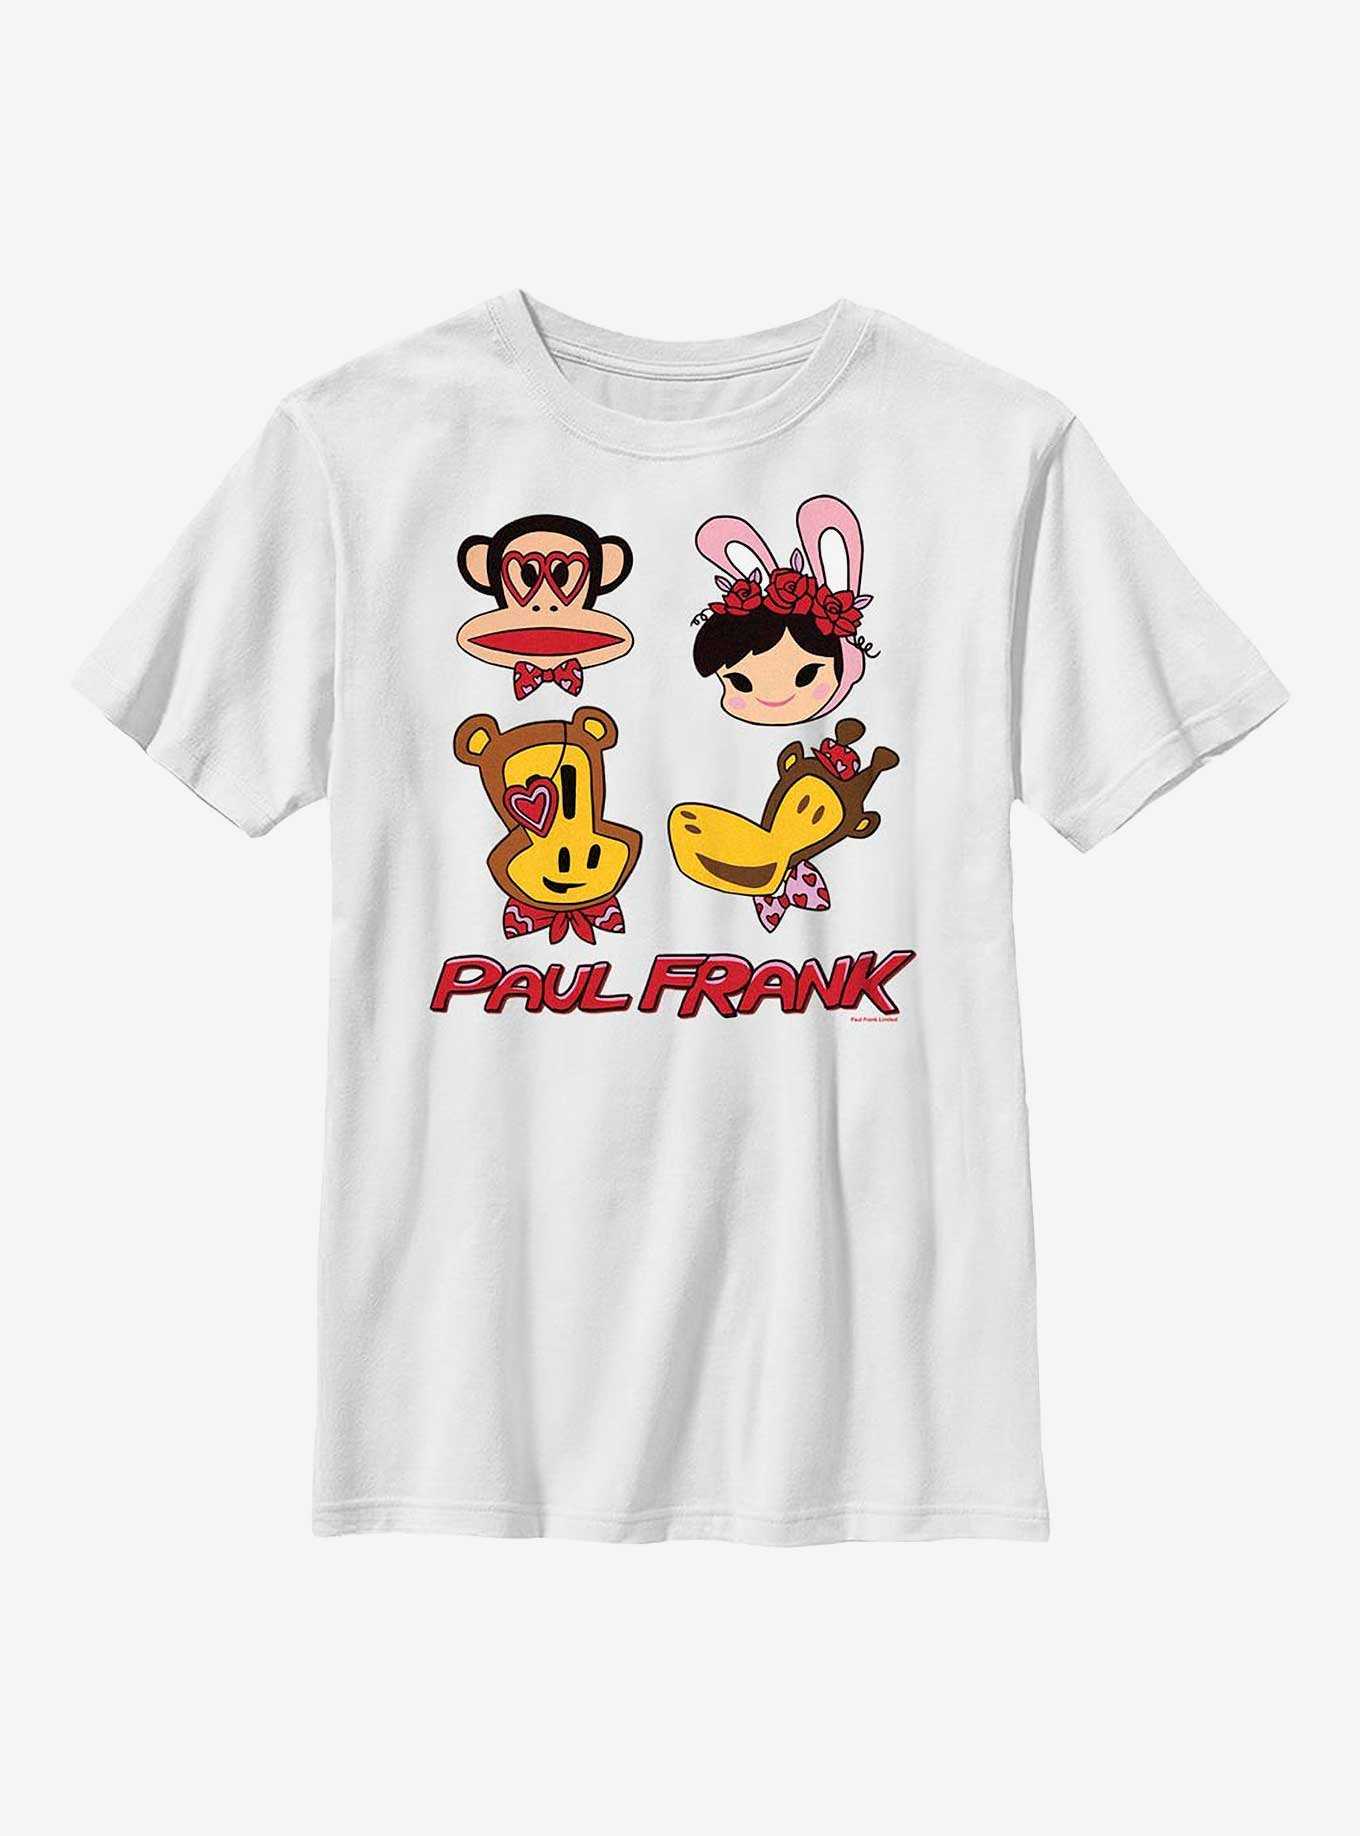 Paul Frank Valentine's Characters Youth T-Shirt, , hi-res